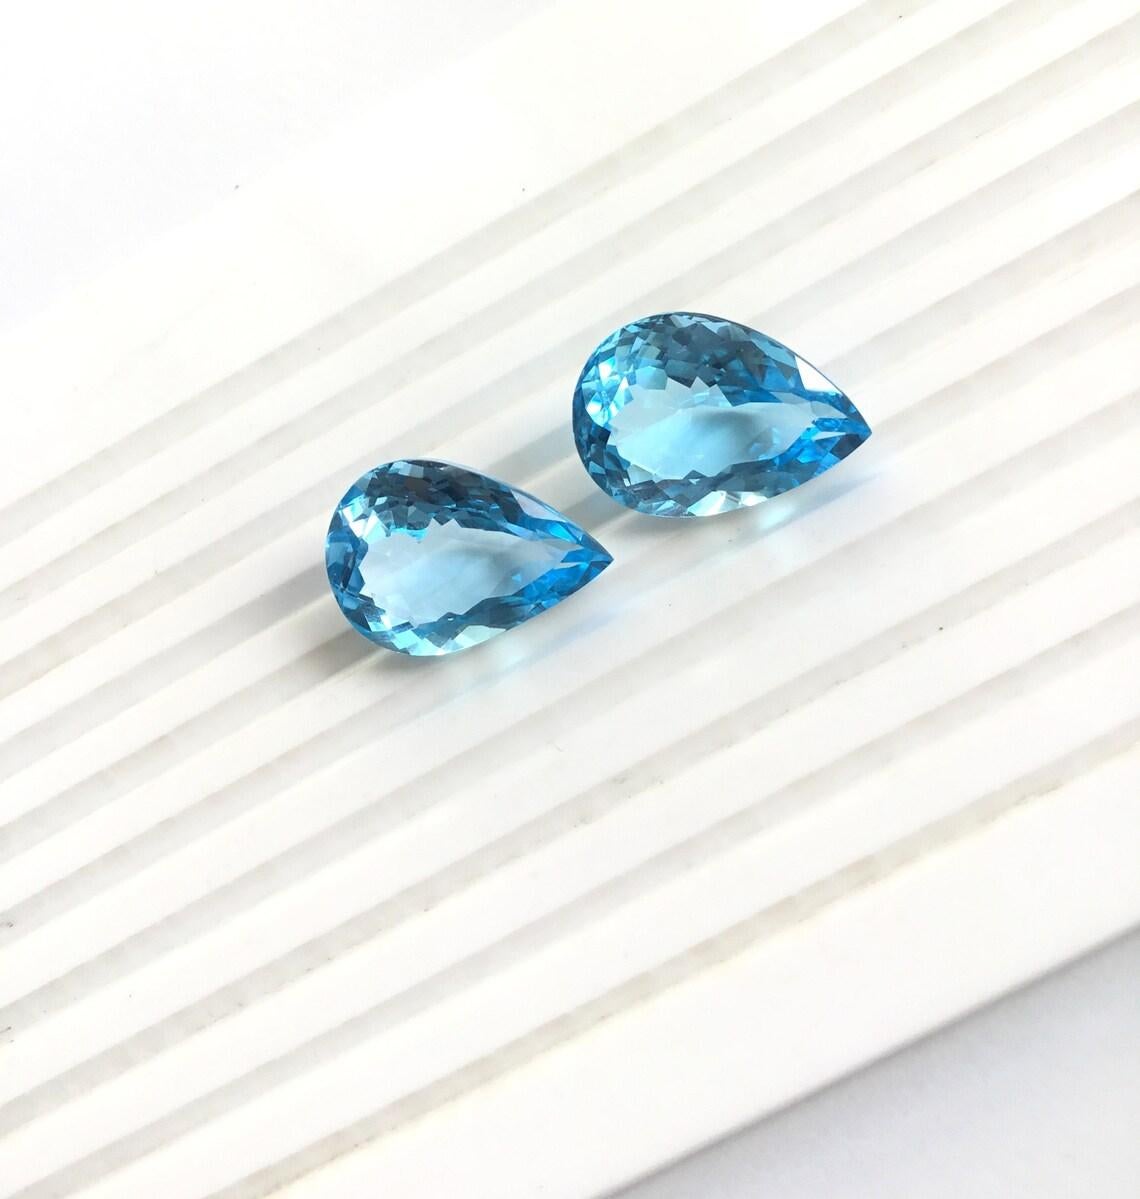 38 Carats Blue Topaz Pear Pair Natural Gemstone 2 Piece Faceted Earrings Gem For Sale 1